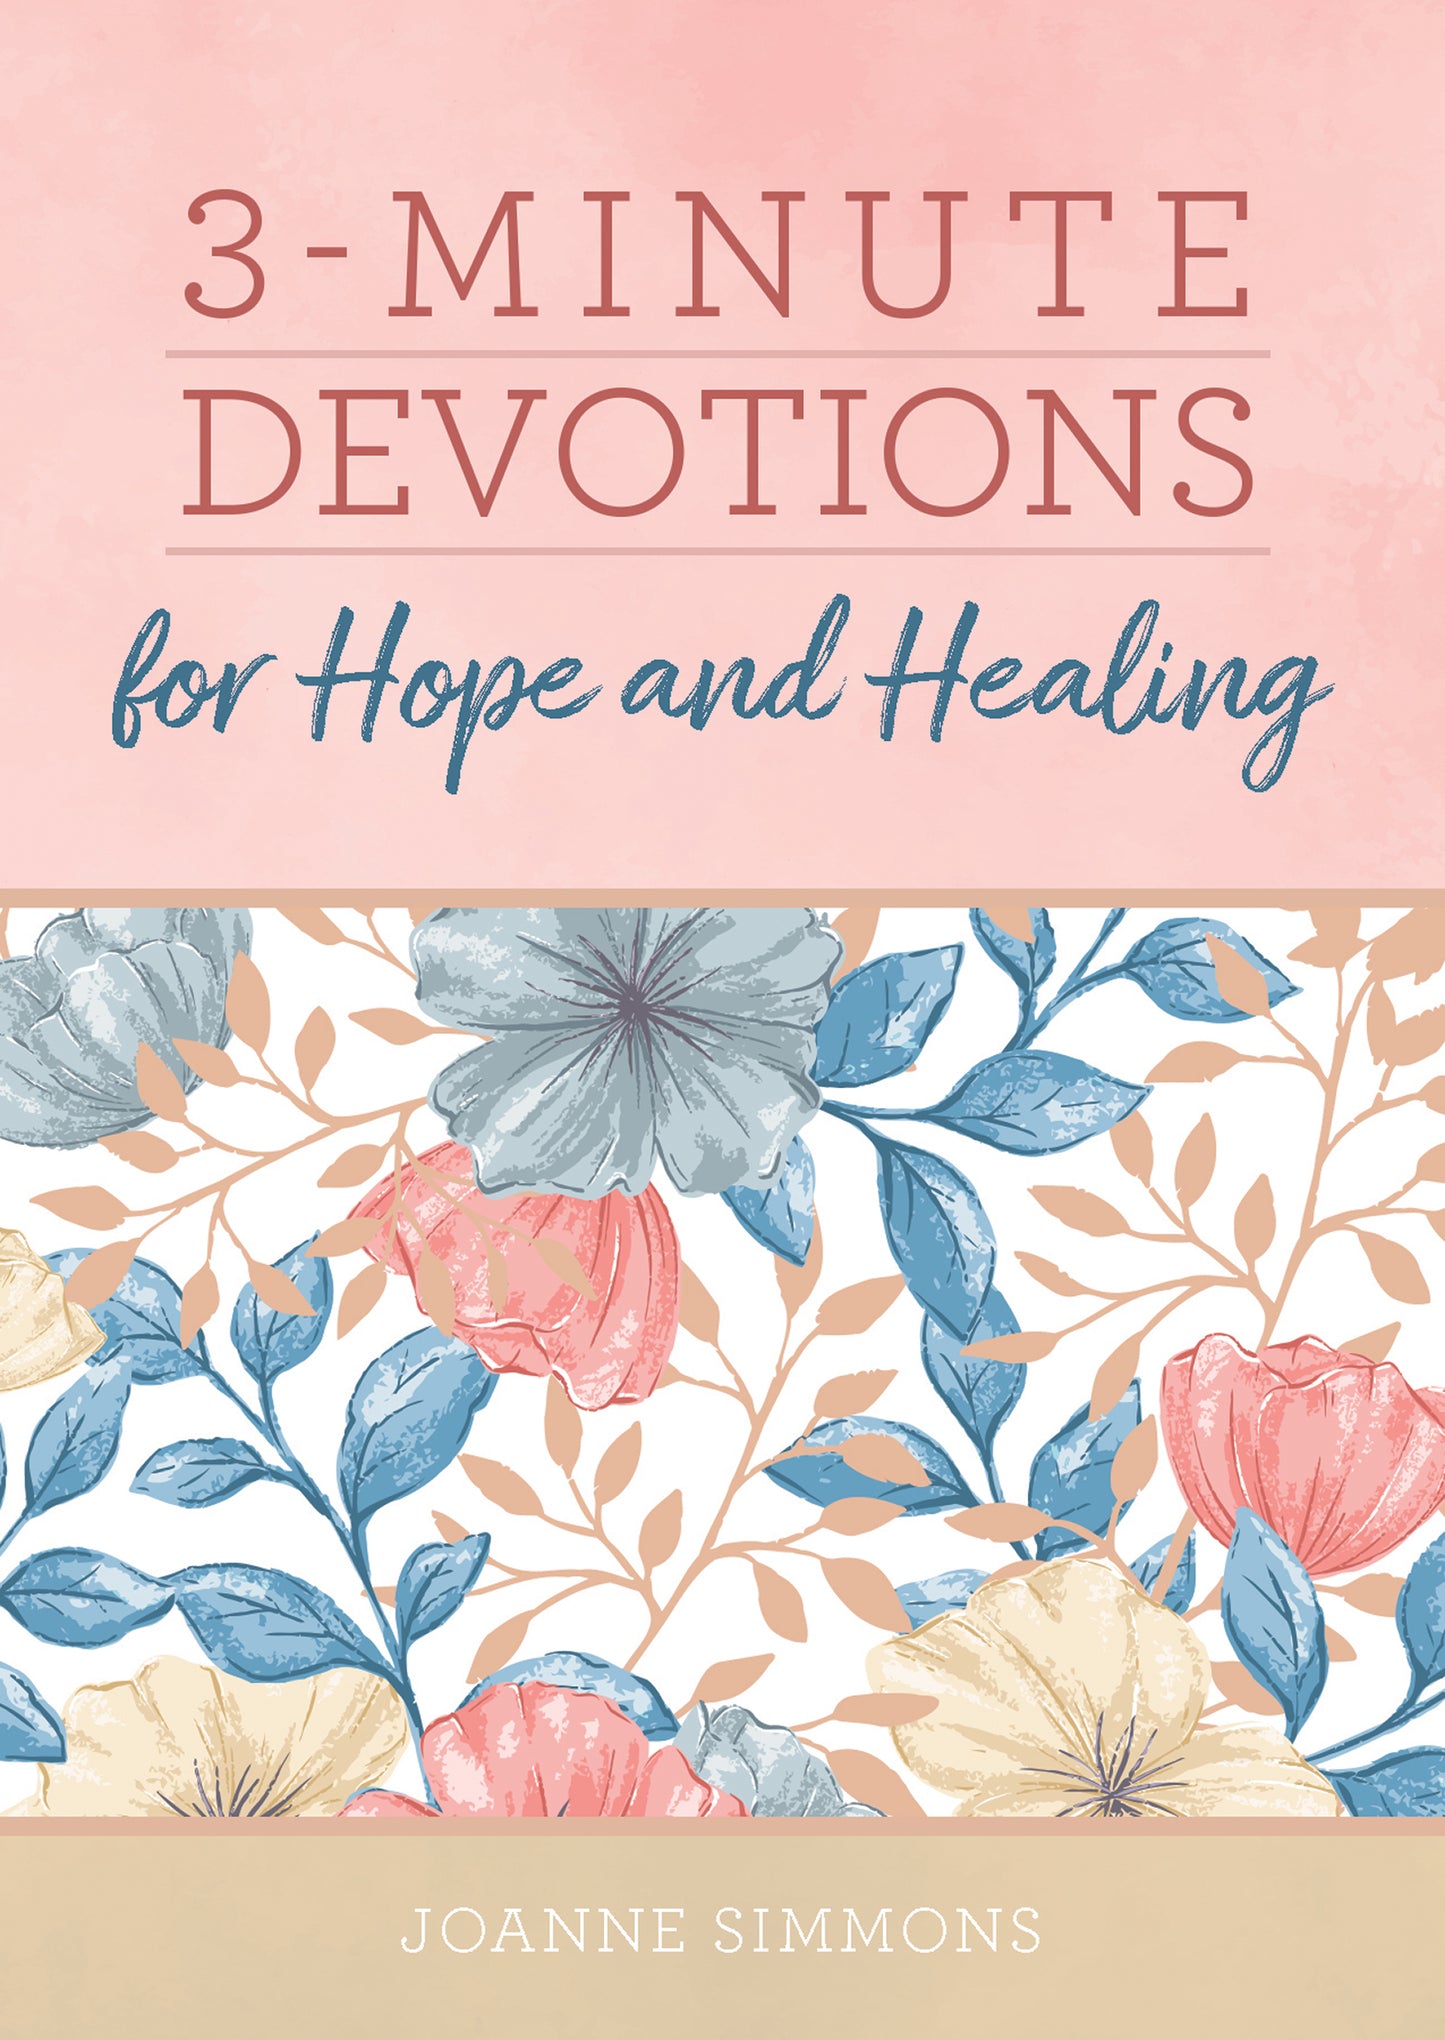 3-Minute Devotions for Hope and Healing - The Christian Gift Company